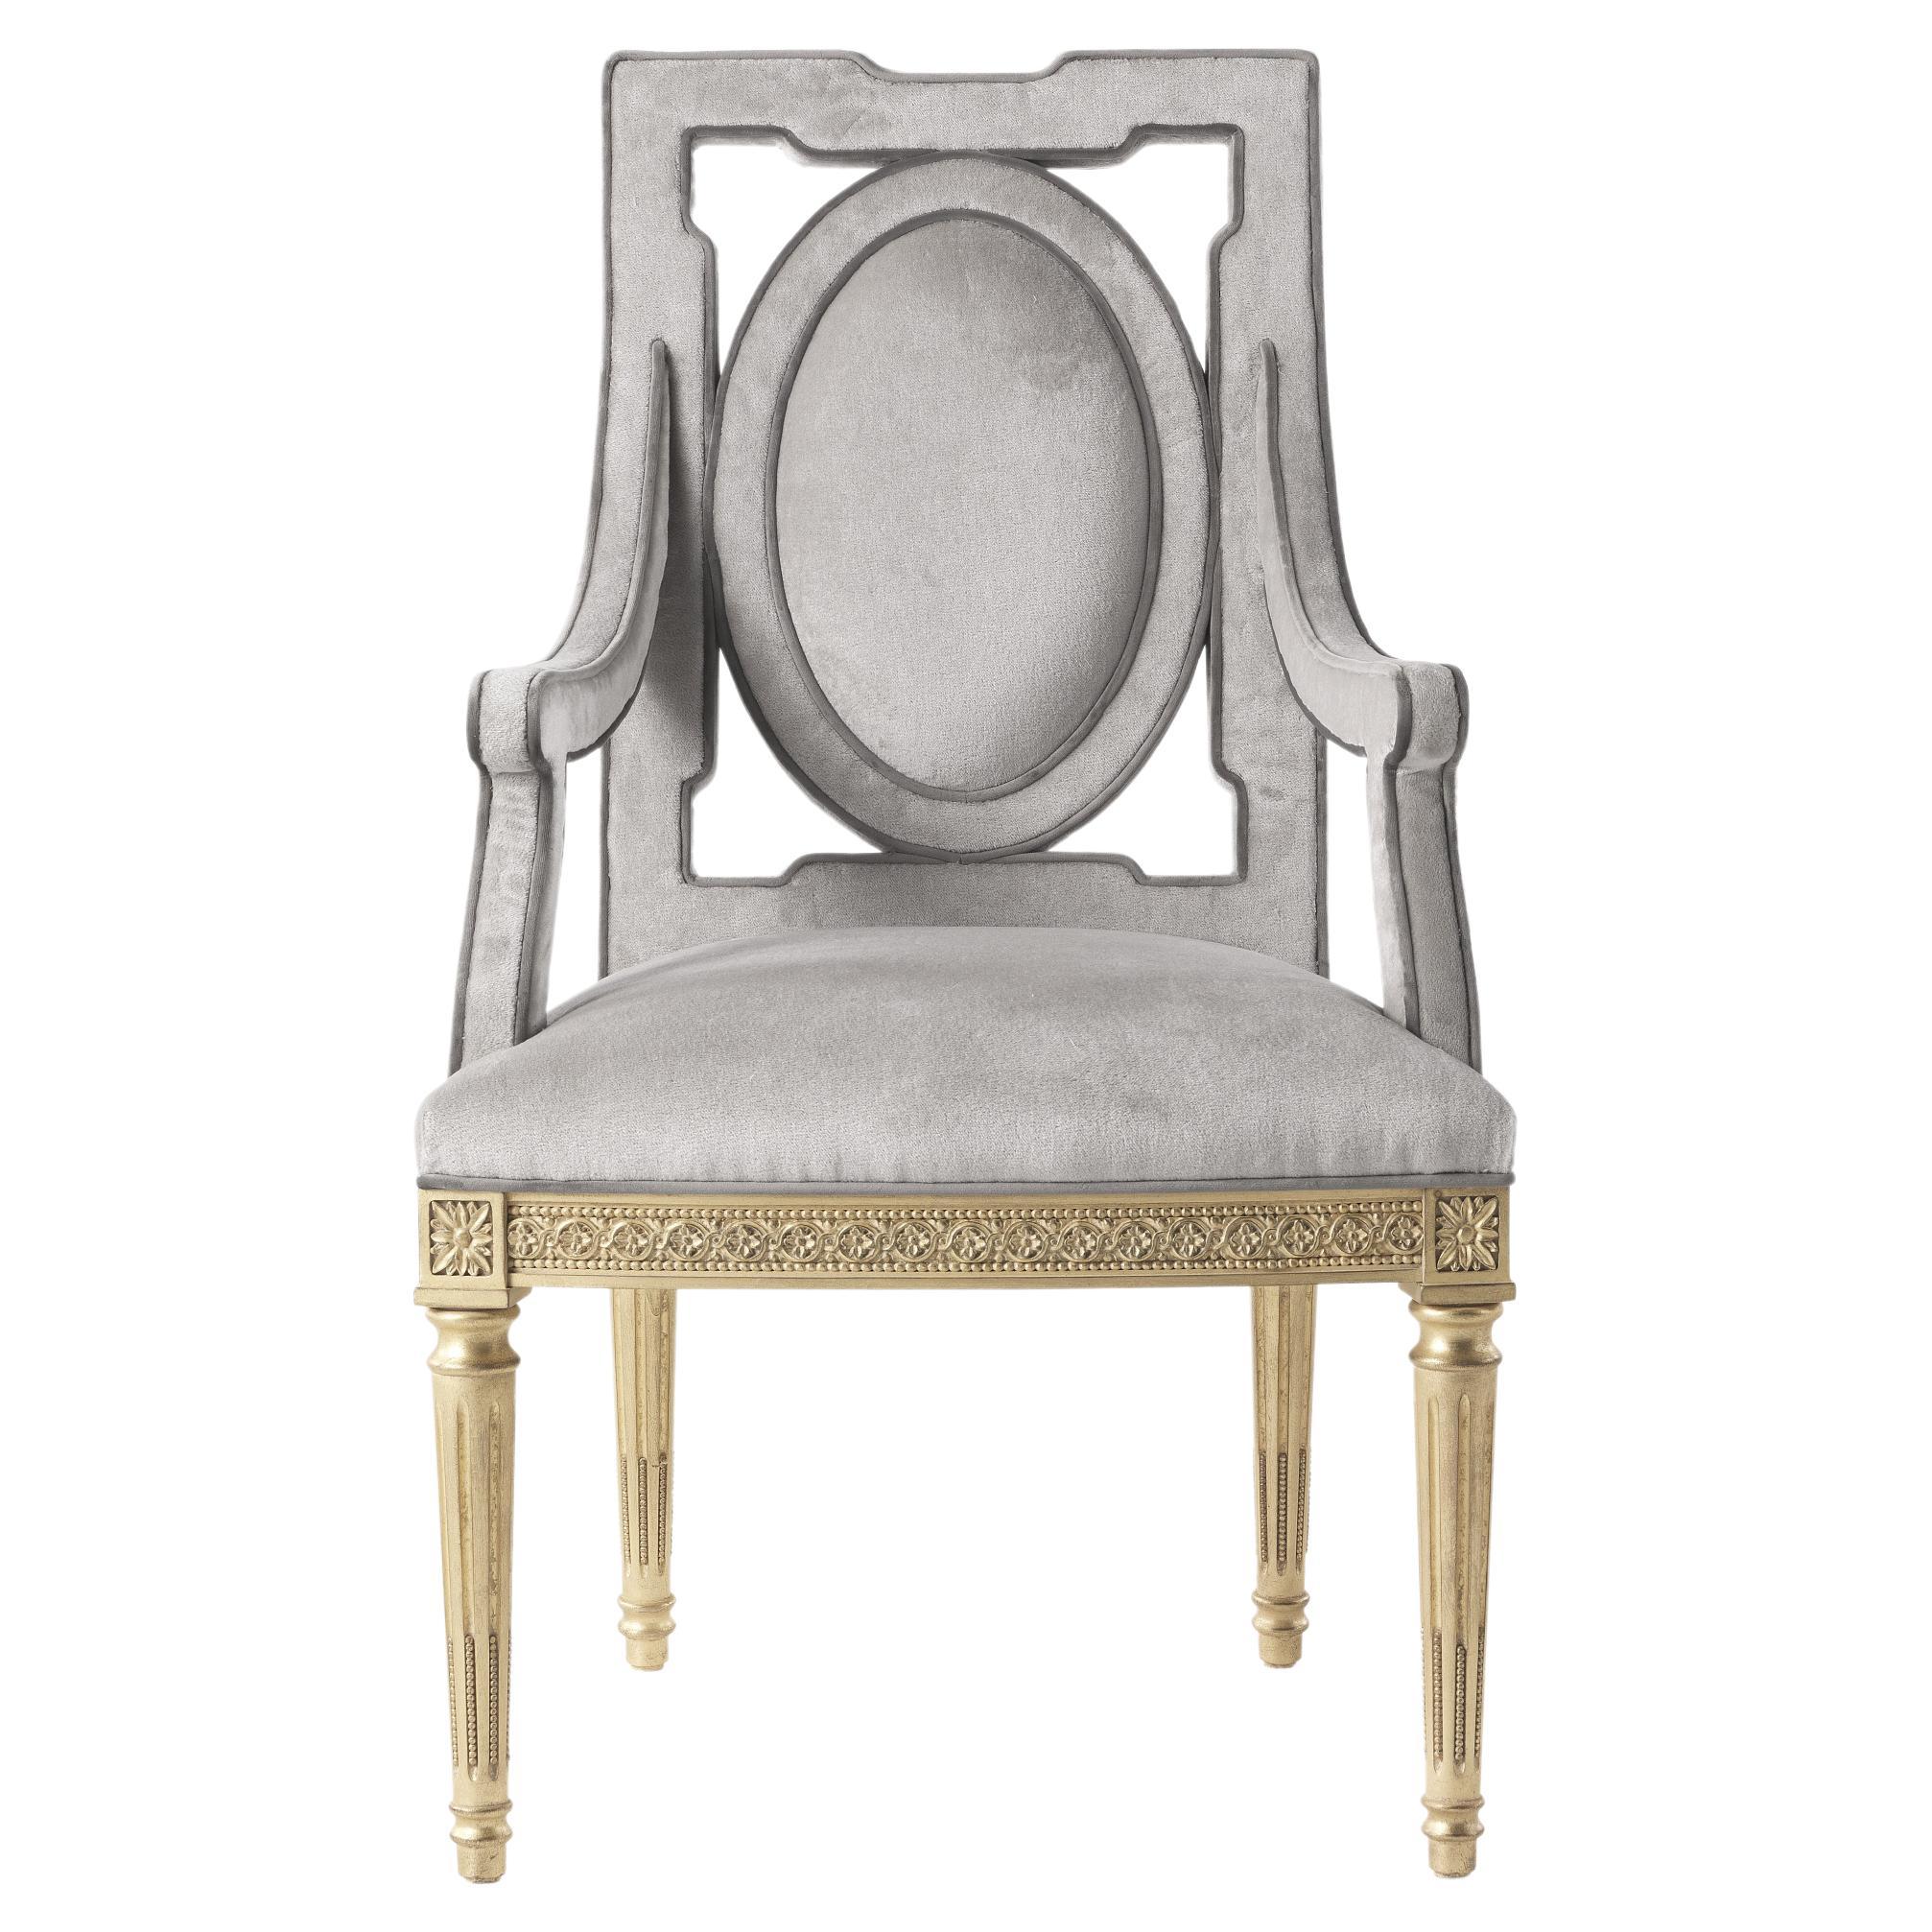 21st Century Satin Chair with Arms in Wood and Fabric in Style of Louis XVI